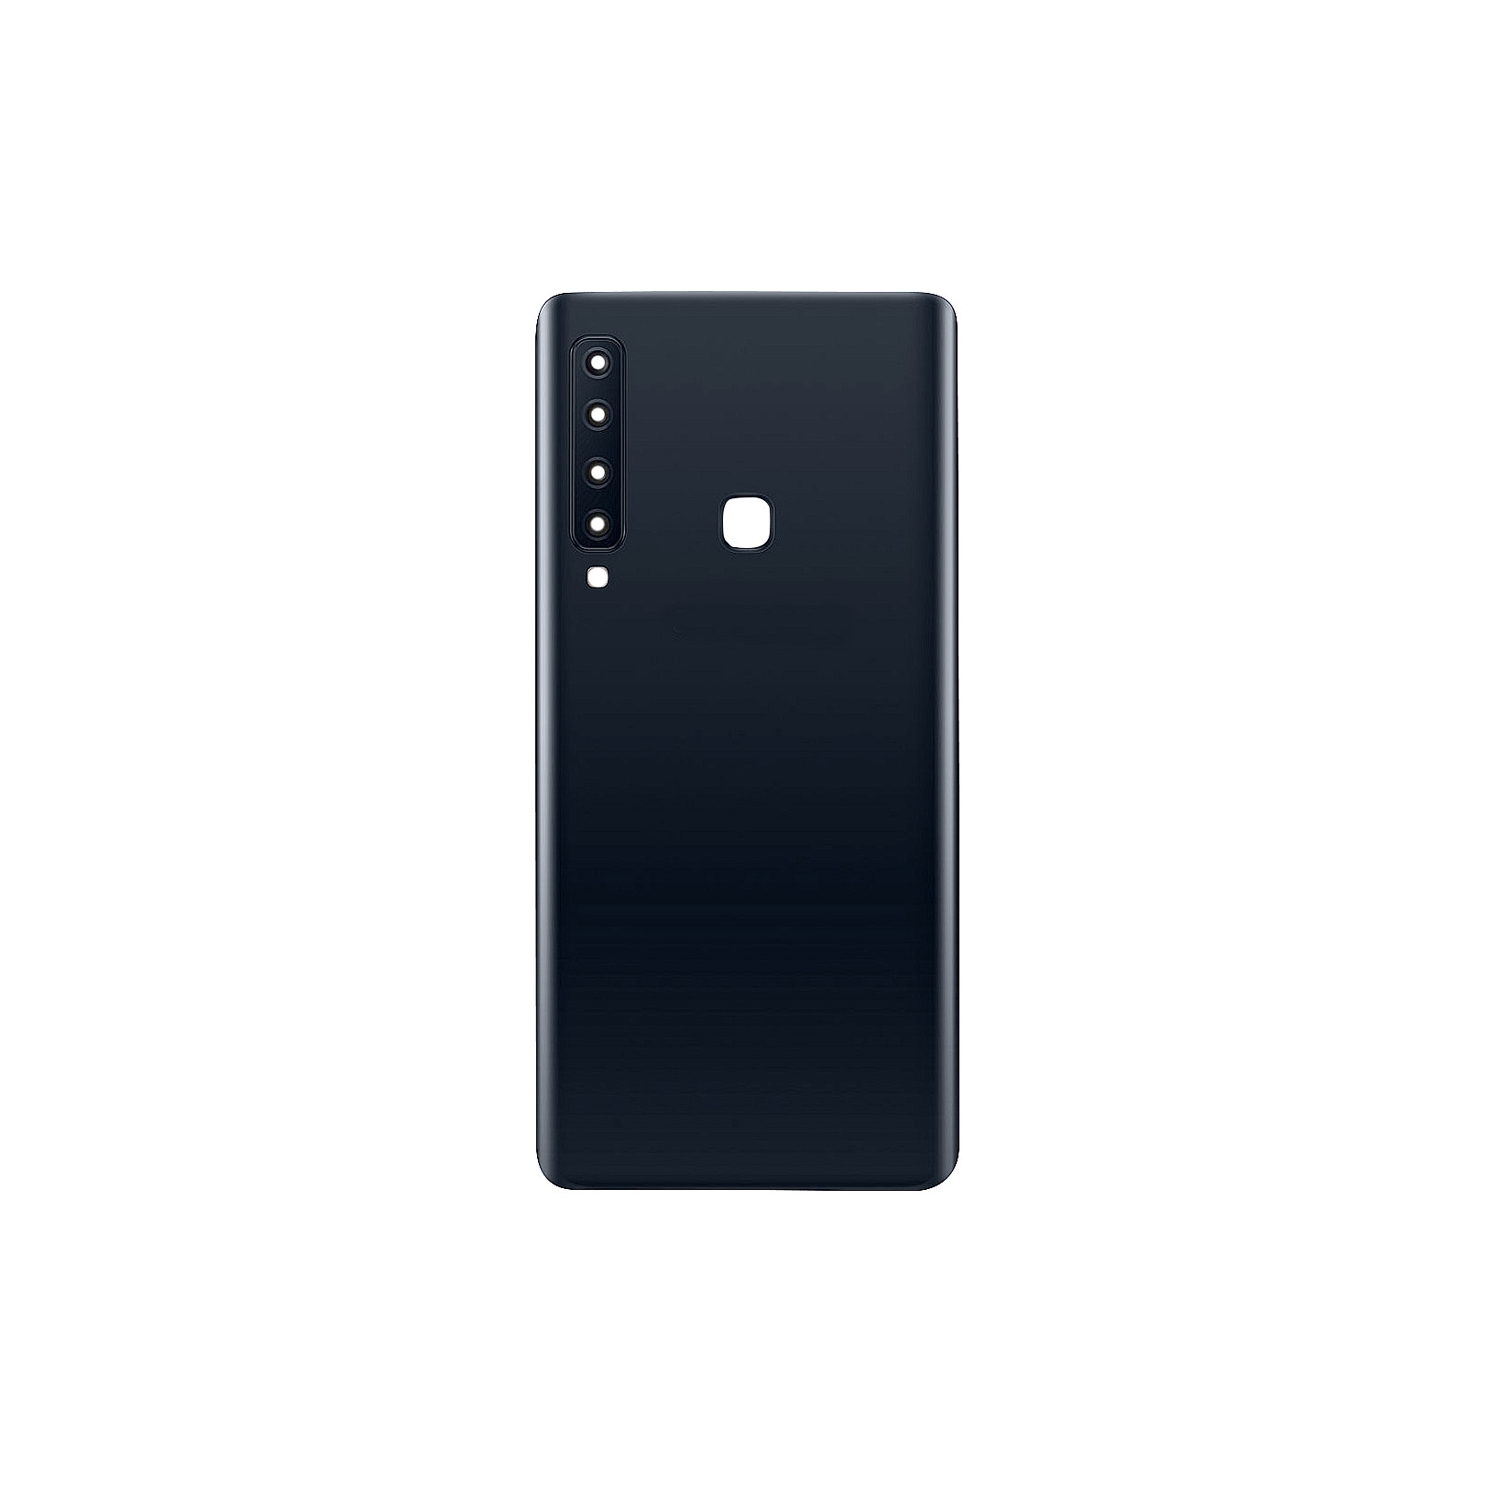 Replacement Battery Back Housing Glass Cover + Camera Lens For Samsung Galaxy A9 (2018) - Caviar Black